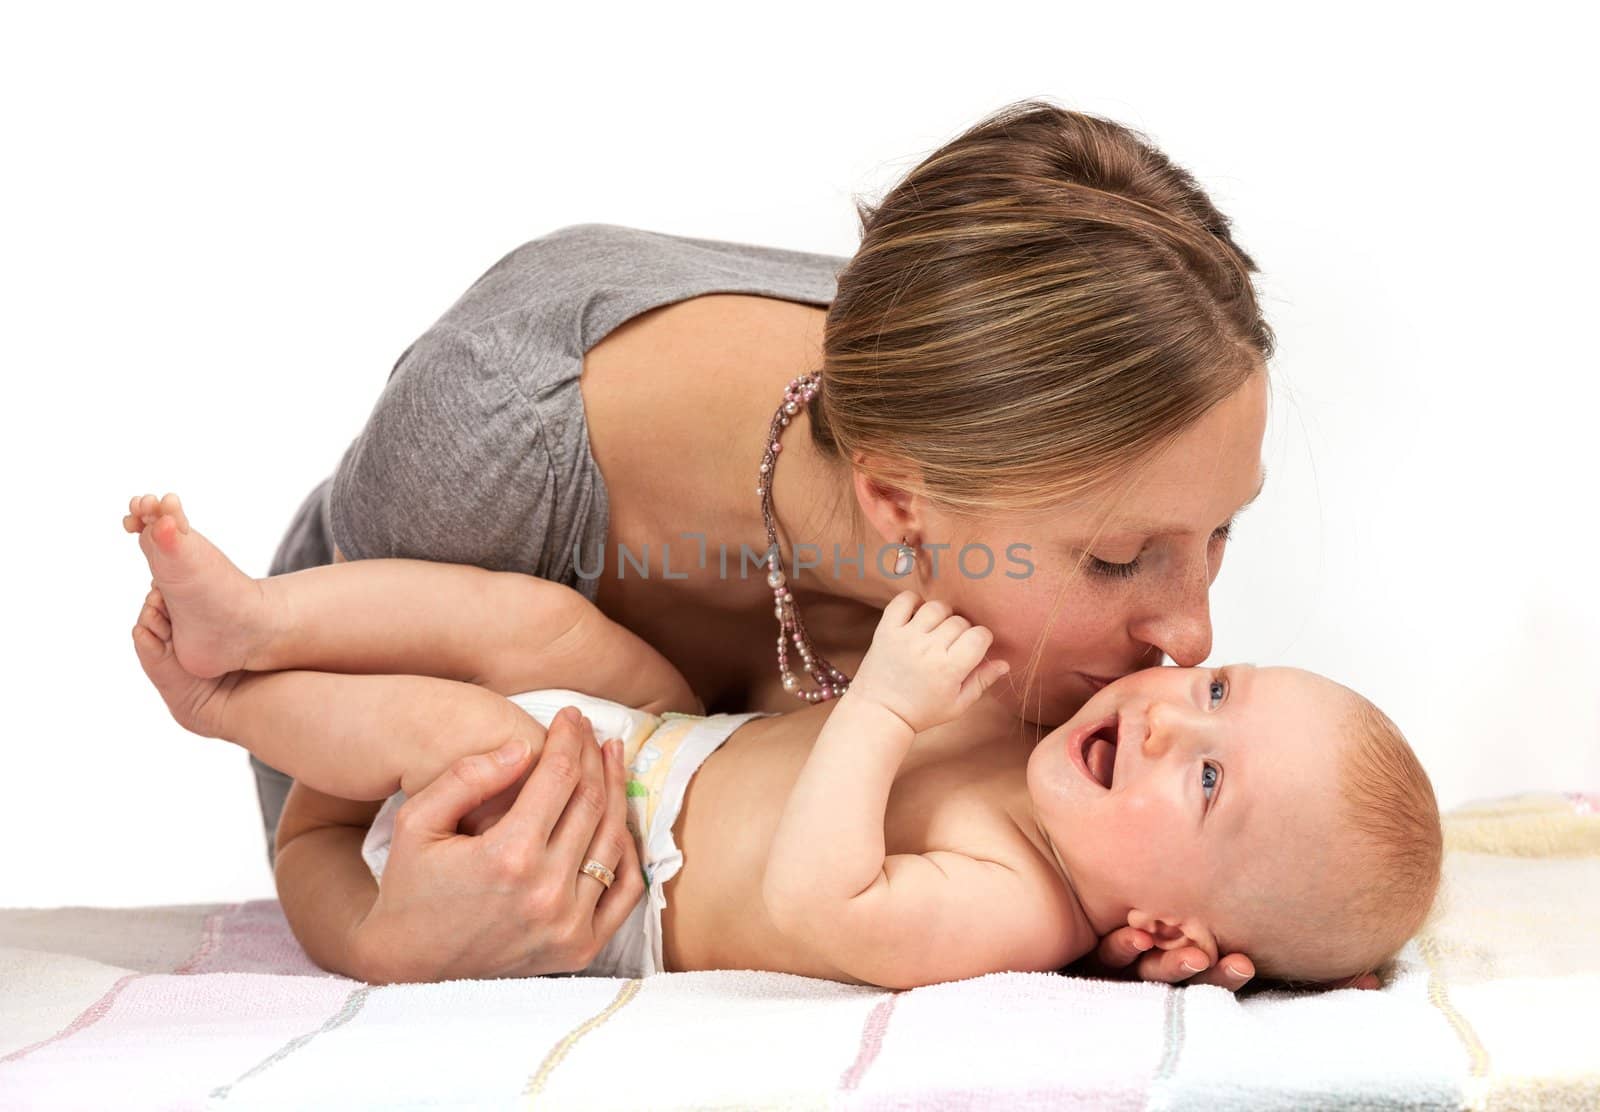 Young Caucasian woman kissing her baby son over white background